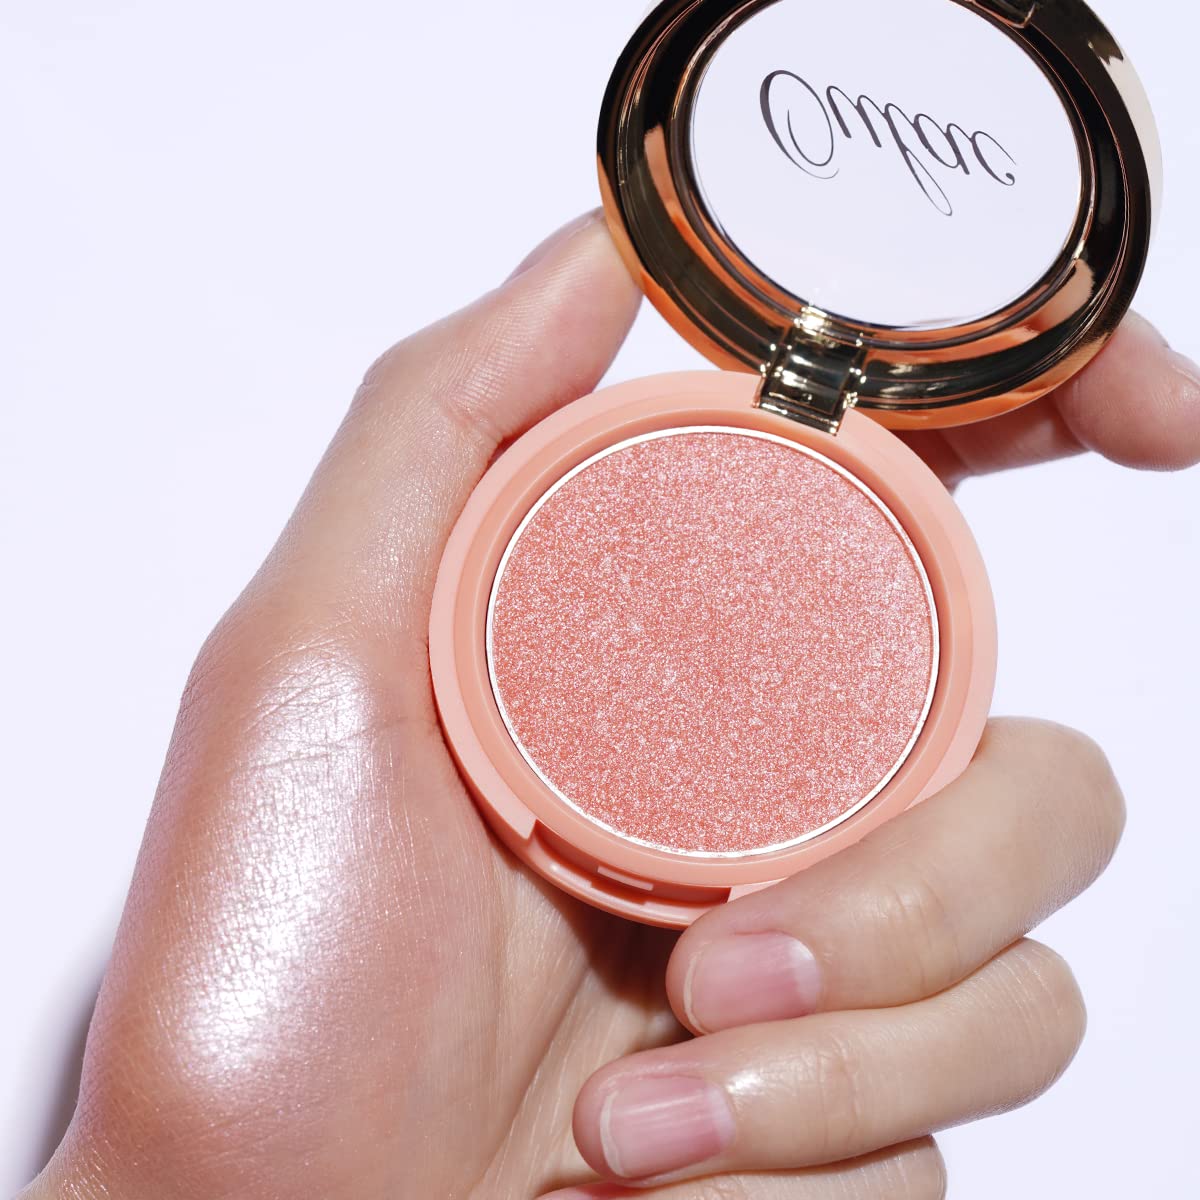 OULAC Lumious Blush Makeup| 2 in 1 Cream Blush & Highlighter